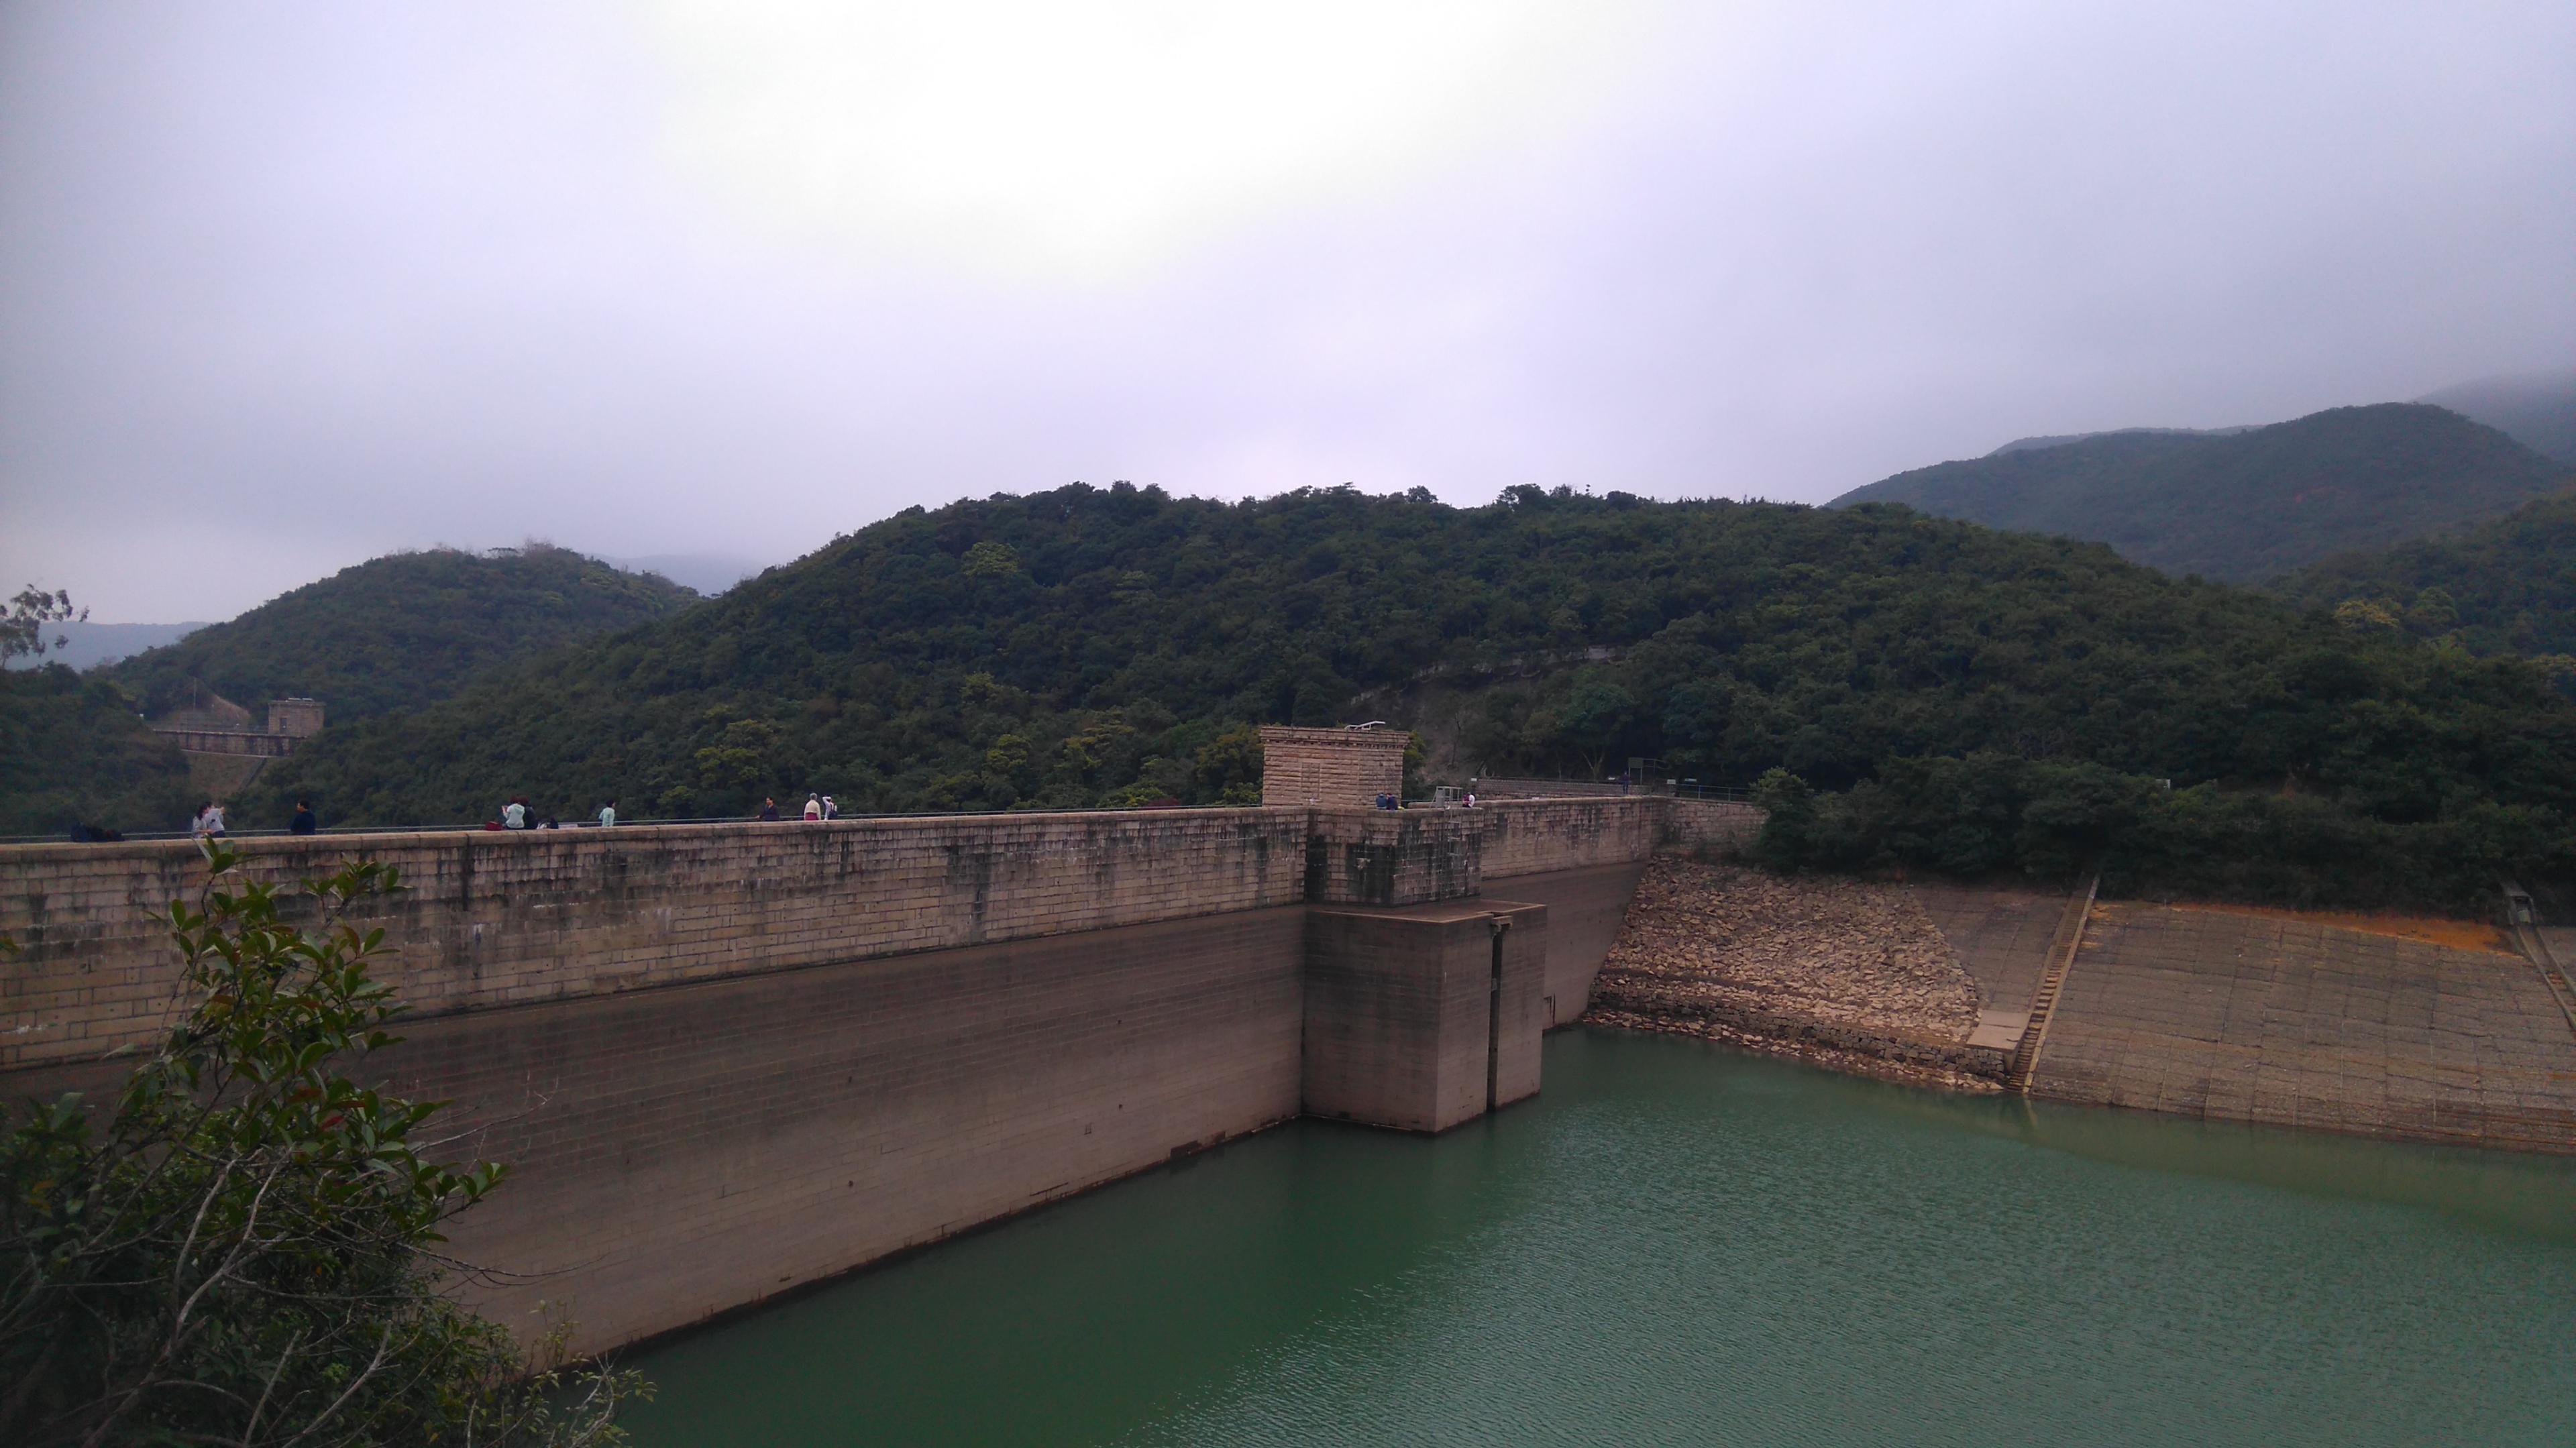 Cover image of this place Tai Tam Tuk Reservoir